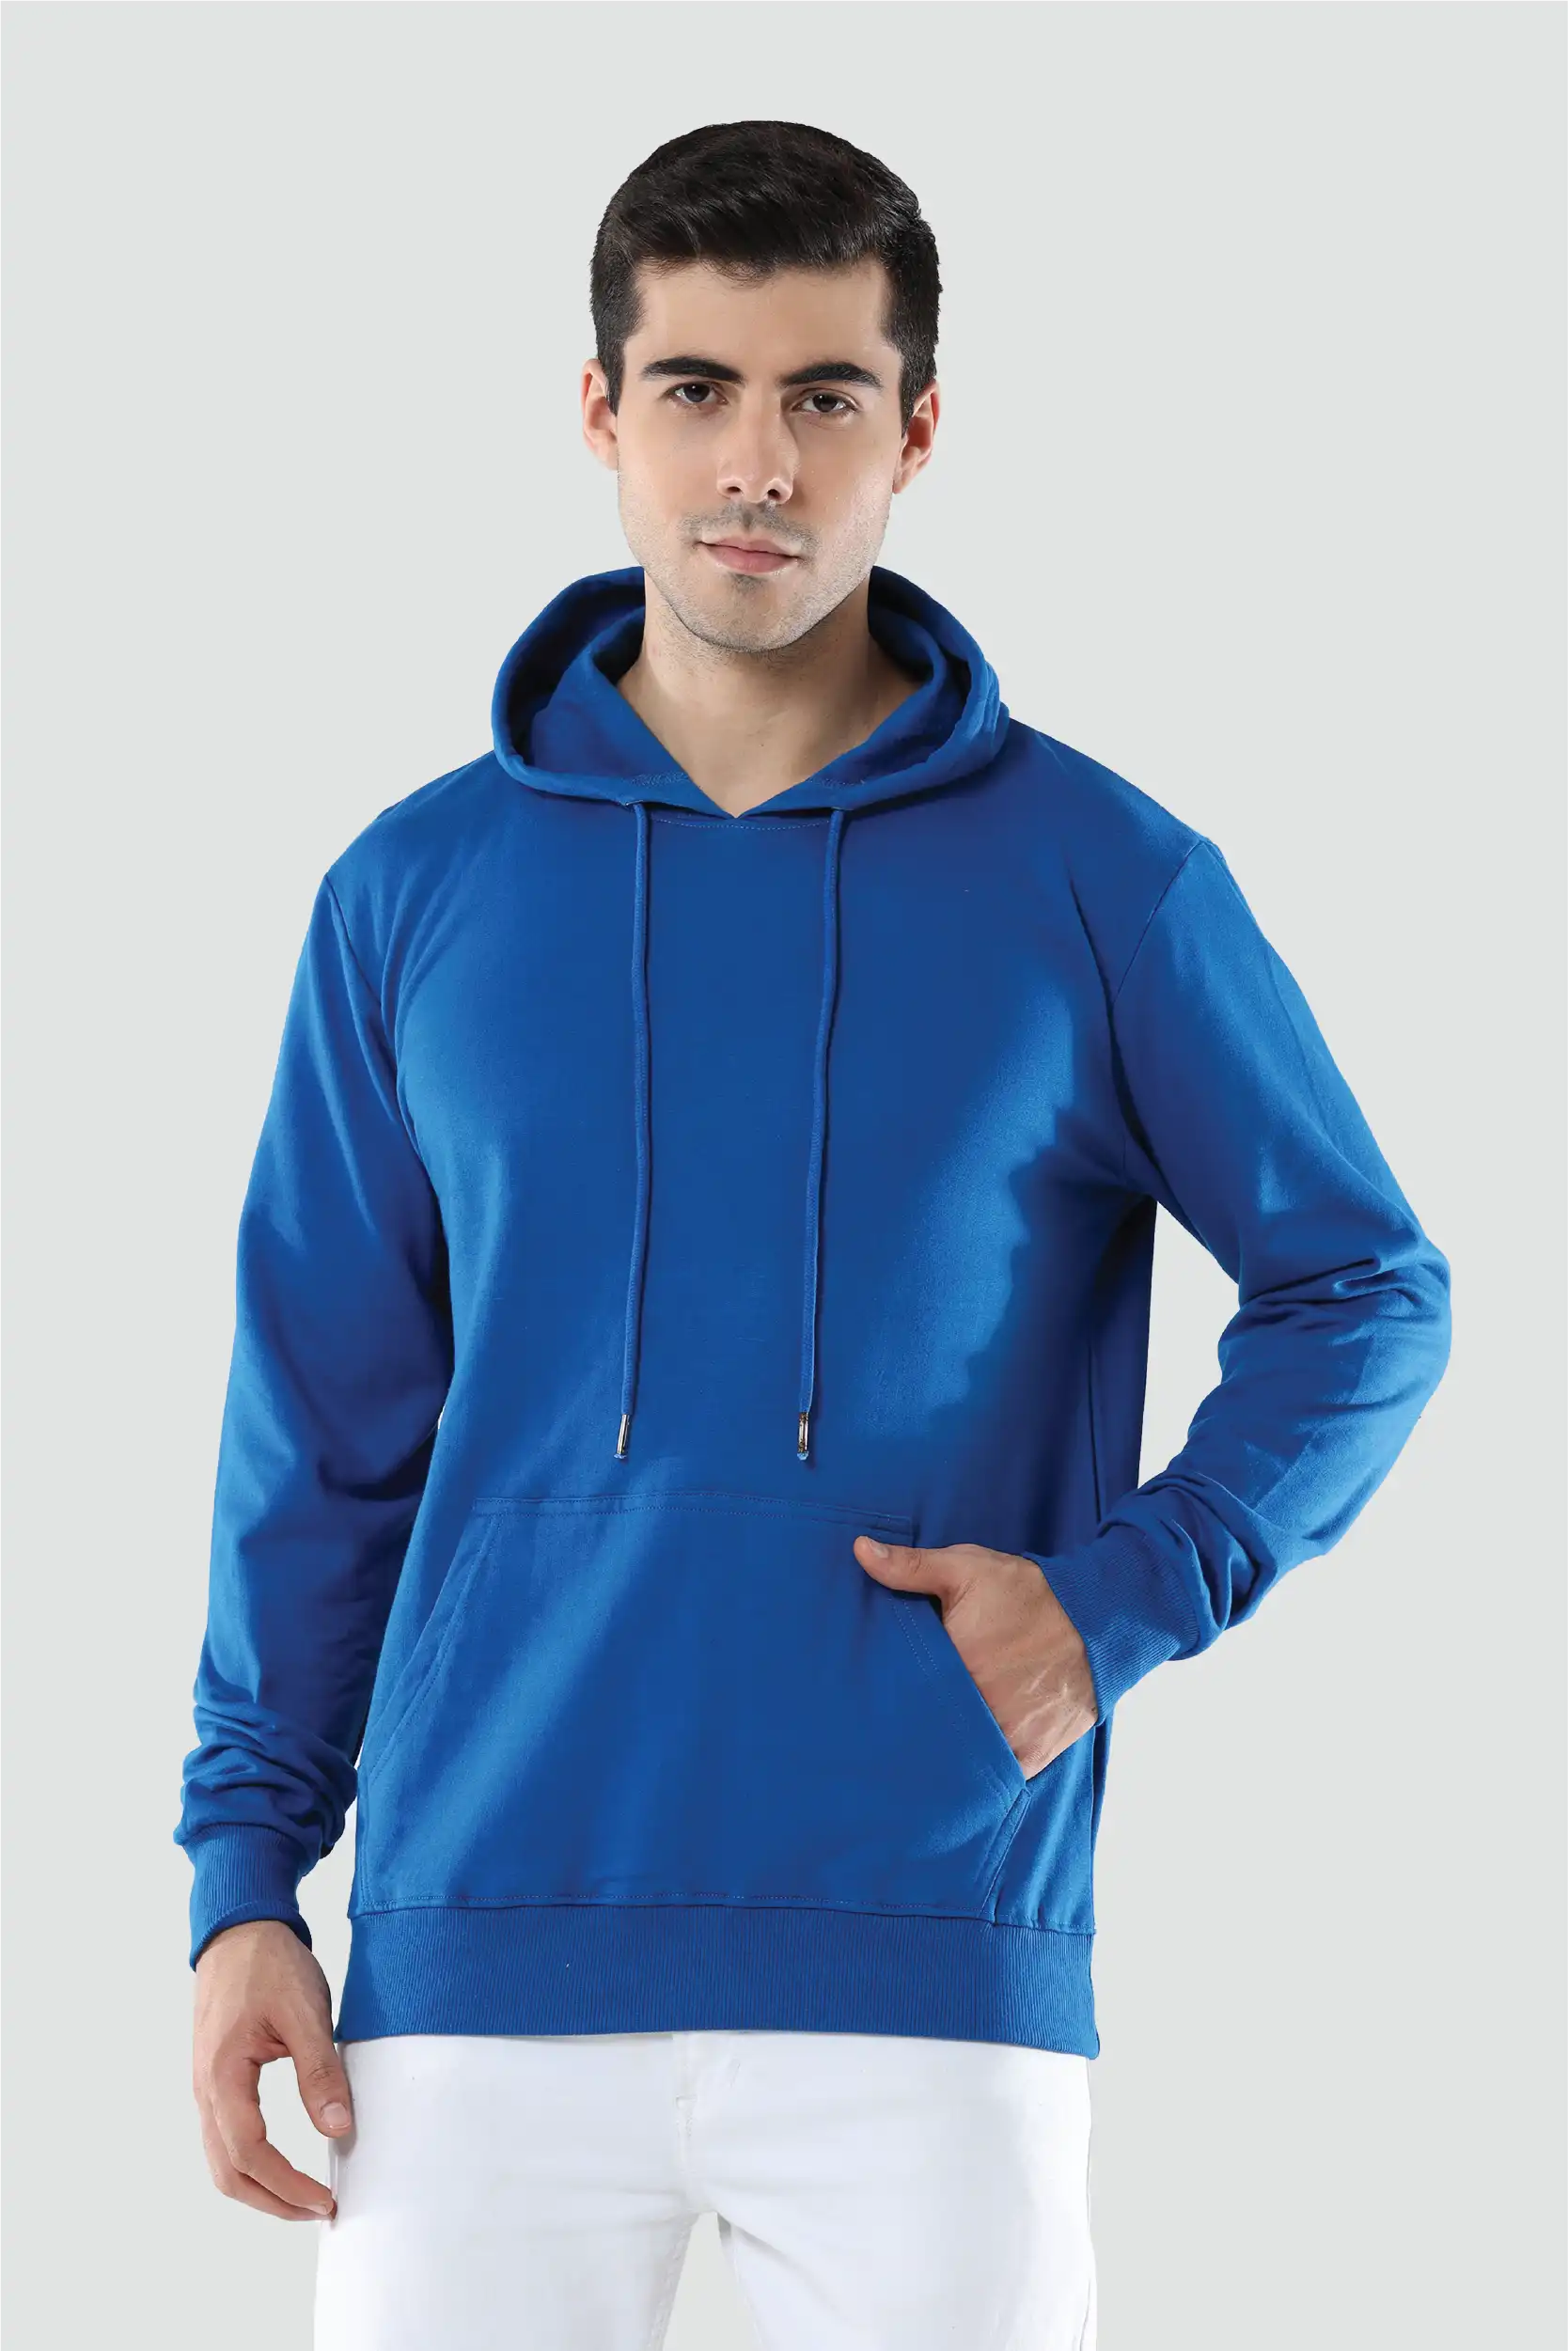 Blank Pullover Hoodies Manufacturers